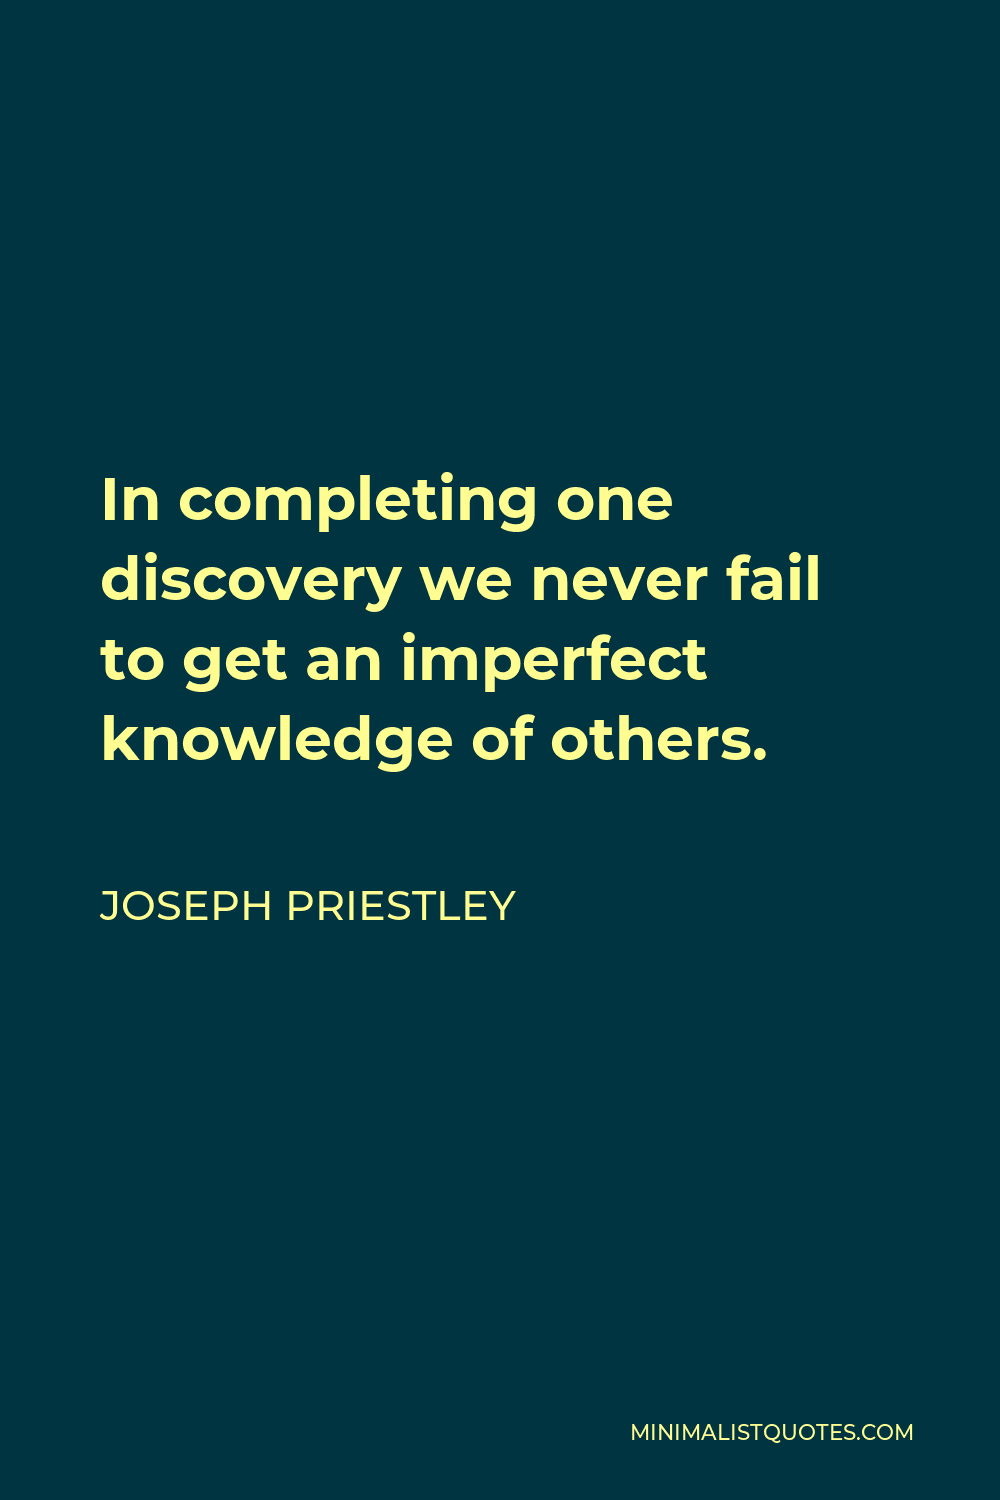 Joseph Priestley Quote - In completing one discovery we never fail to get an imperfect knowledge of others.